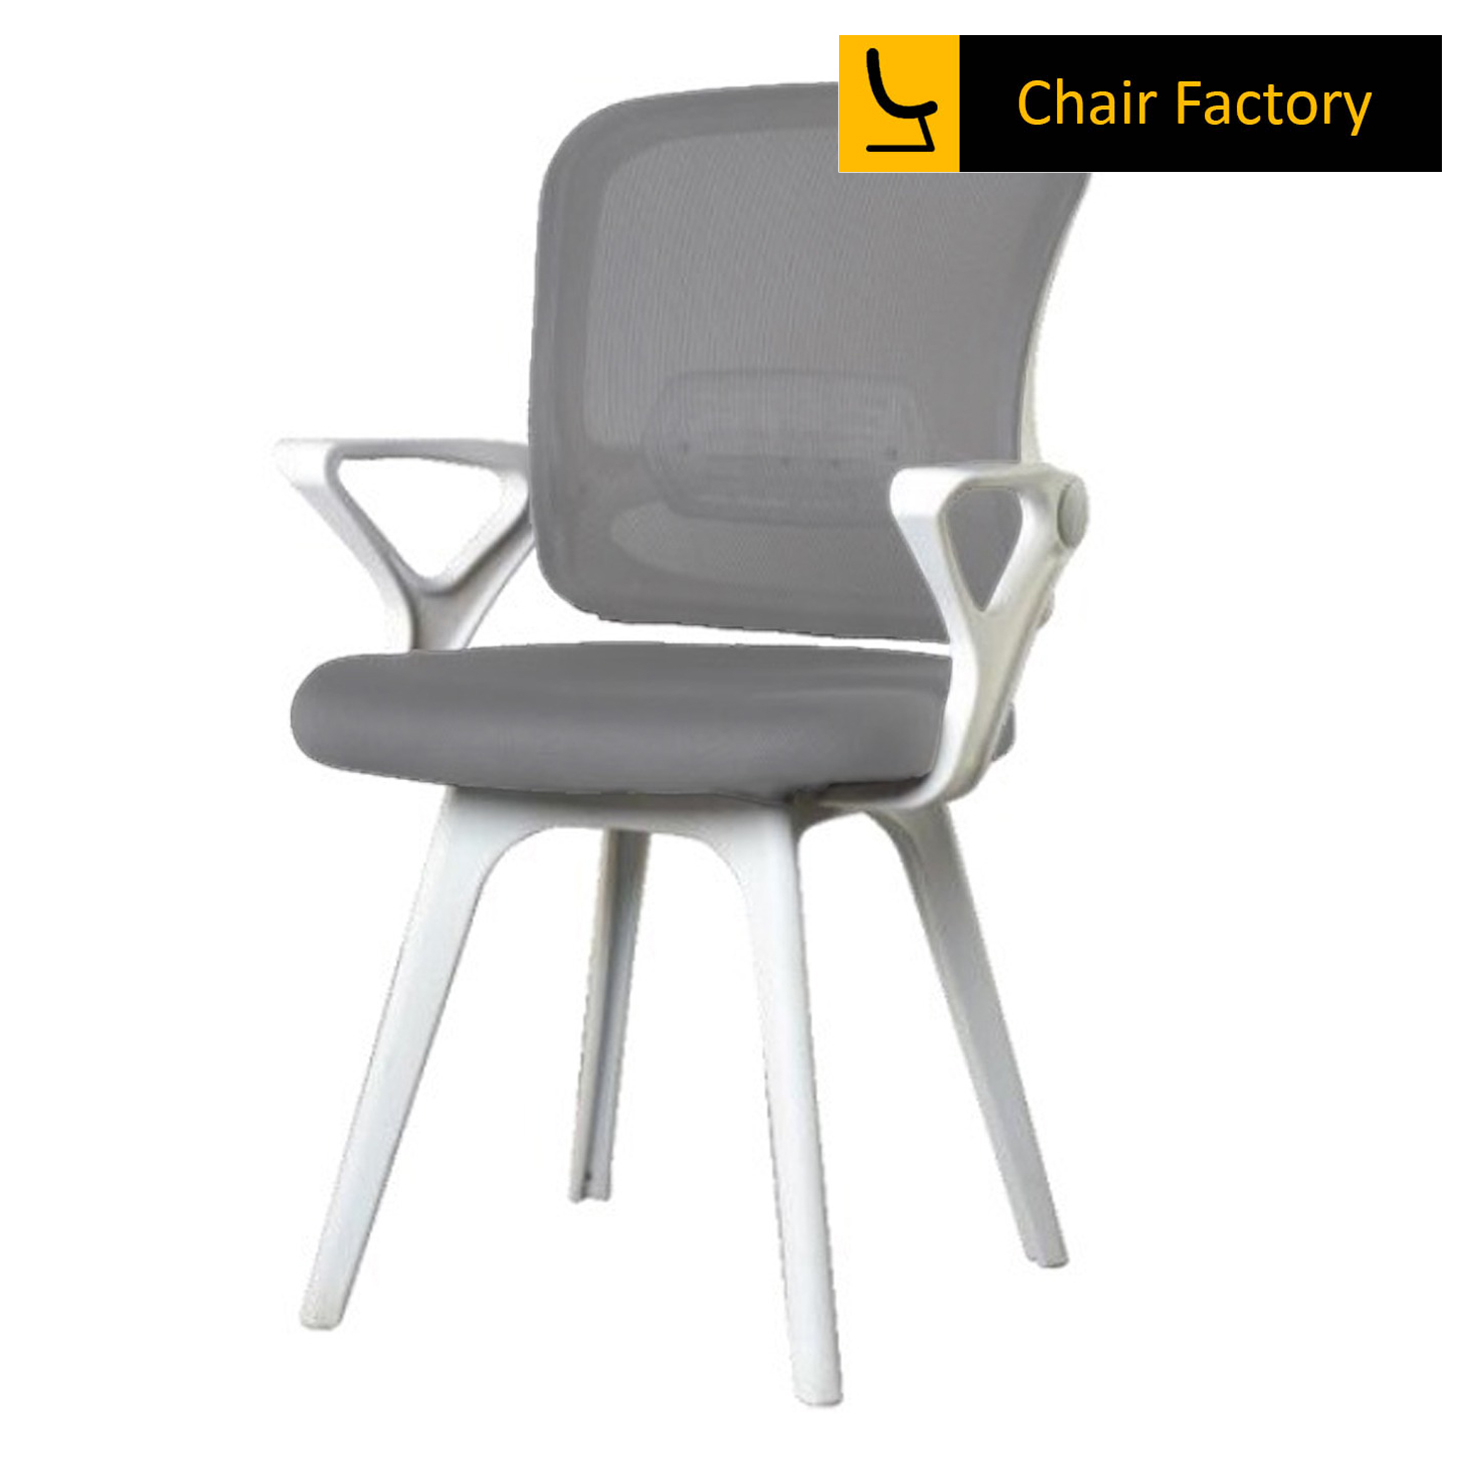 Euroton white visitor office chair